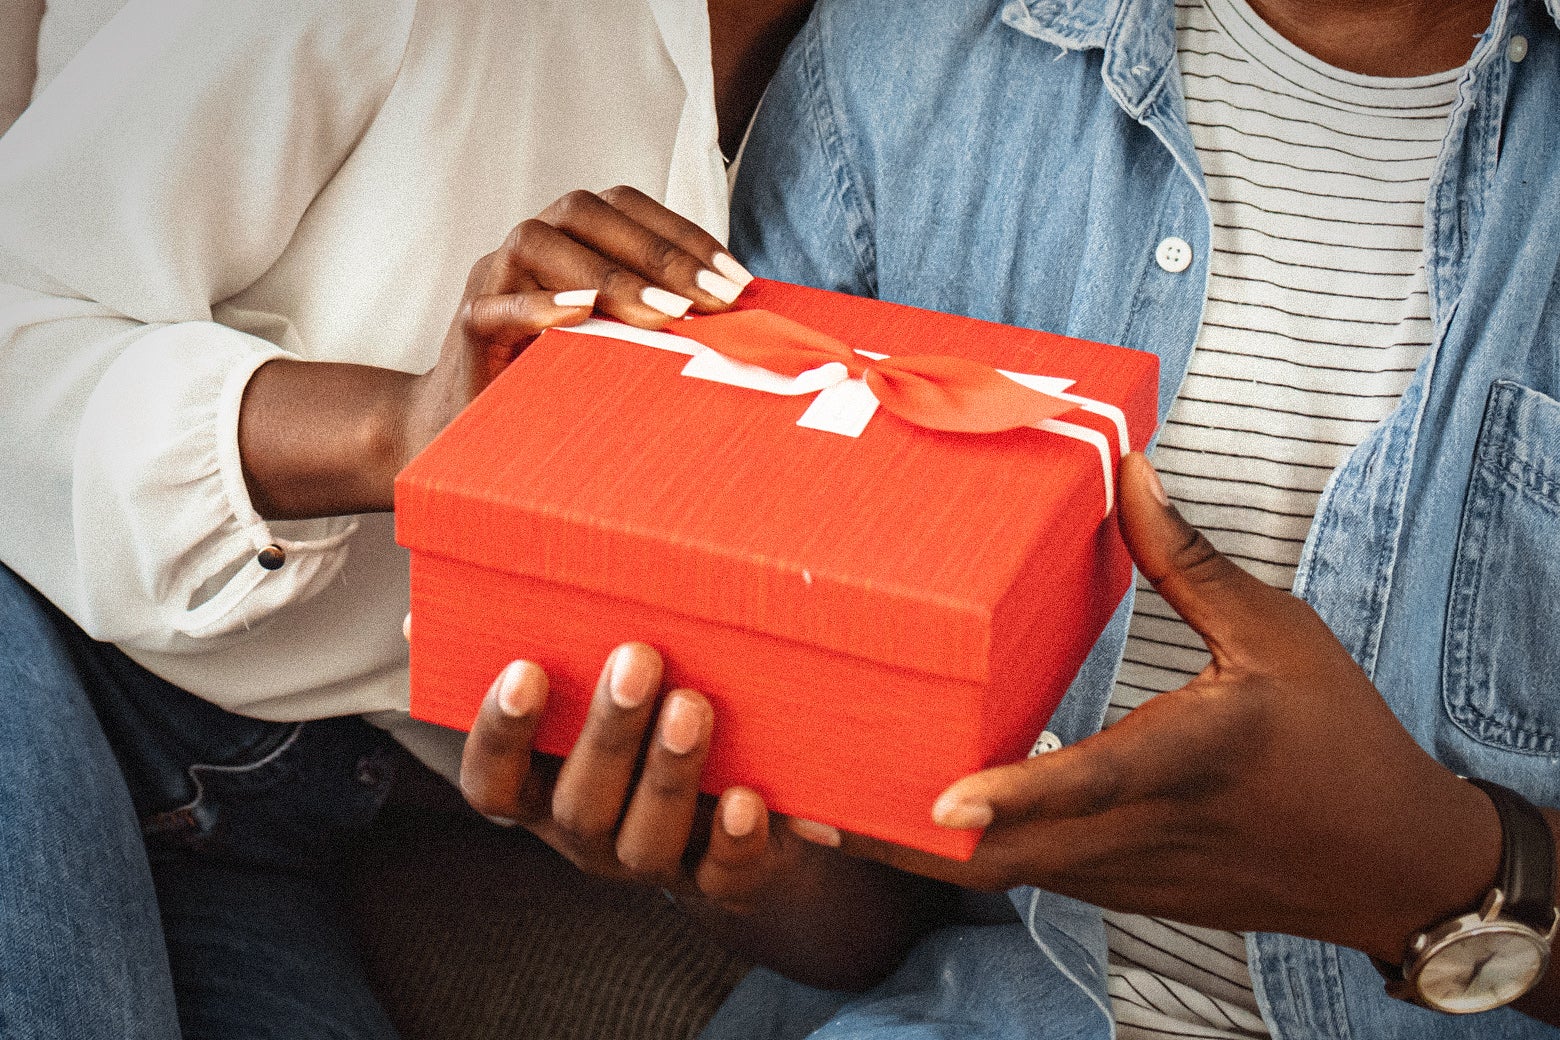 A couple holds a Christmas gift together.